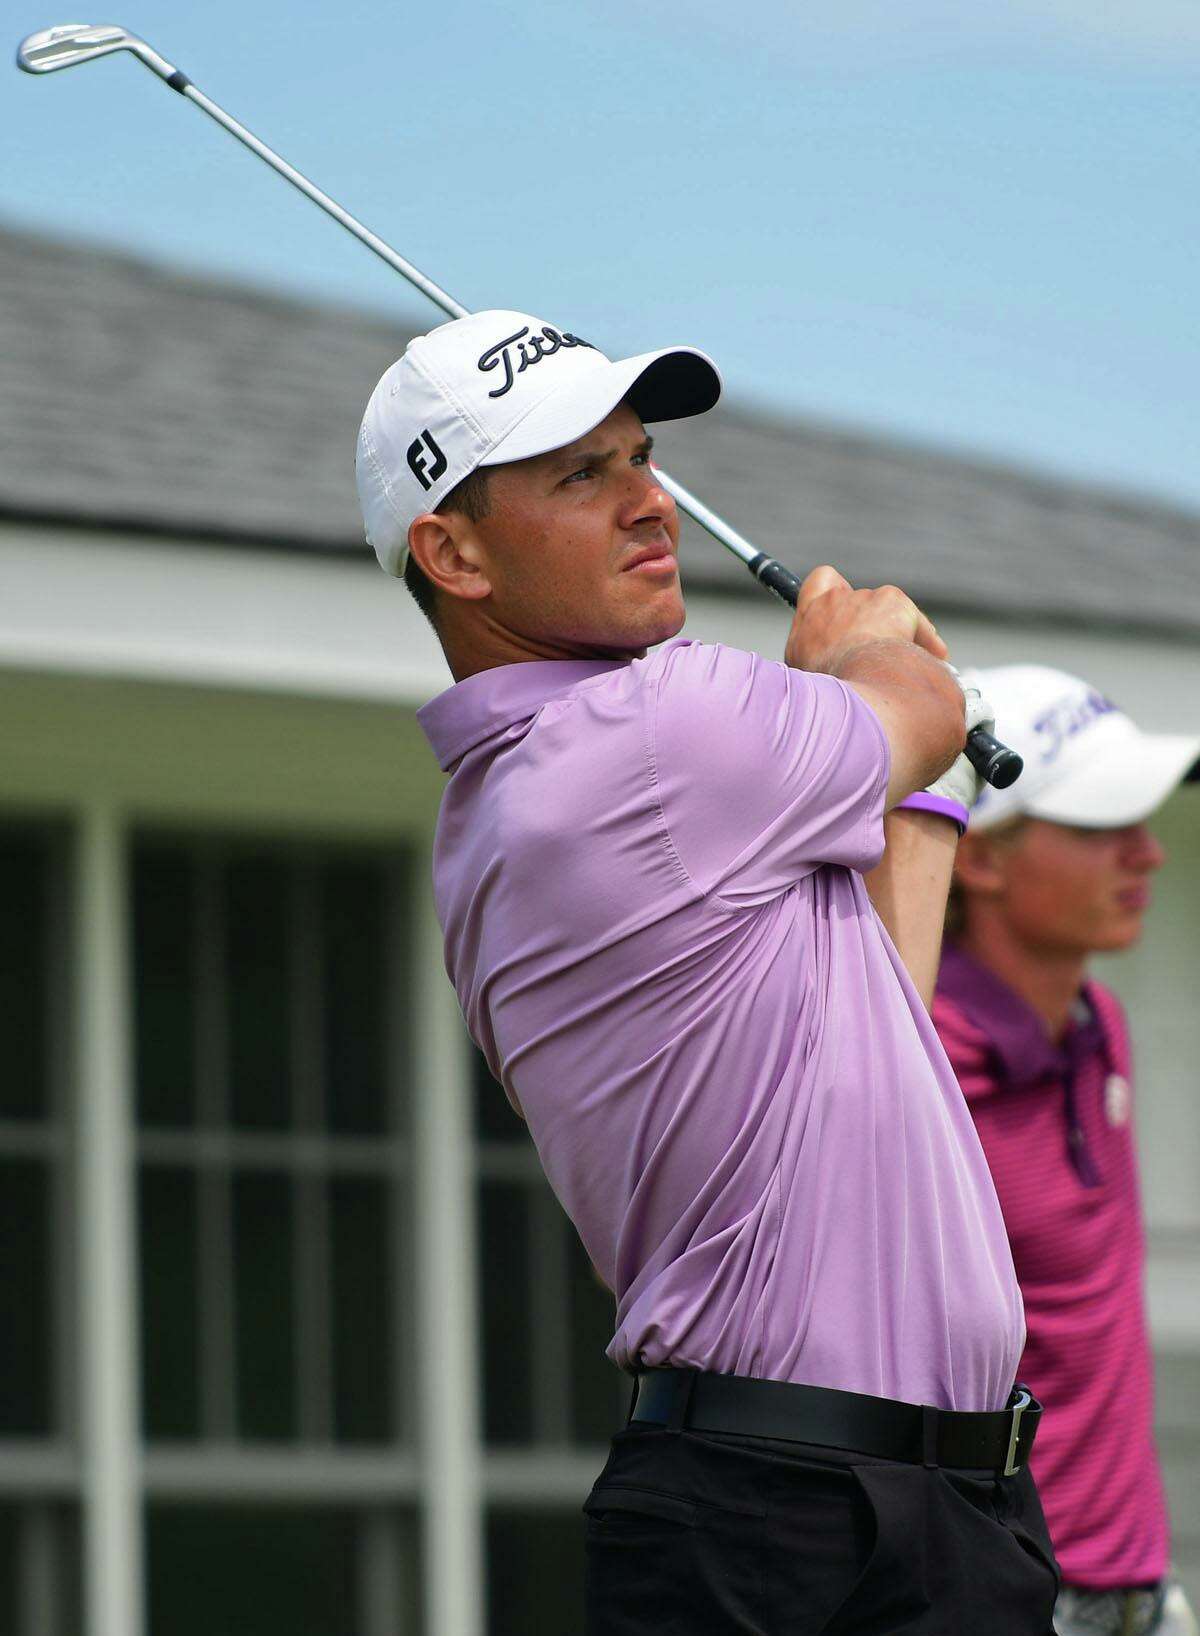 Cody Paladino comptetes against Chris Fosdick in the State Amateur golf final match Thursday, June 25, 2020, at Shorehaven Golf Club in Norwalk, Conn. Paladino advanced to U.S. Open sectional qualifying for the sixth time this past week.